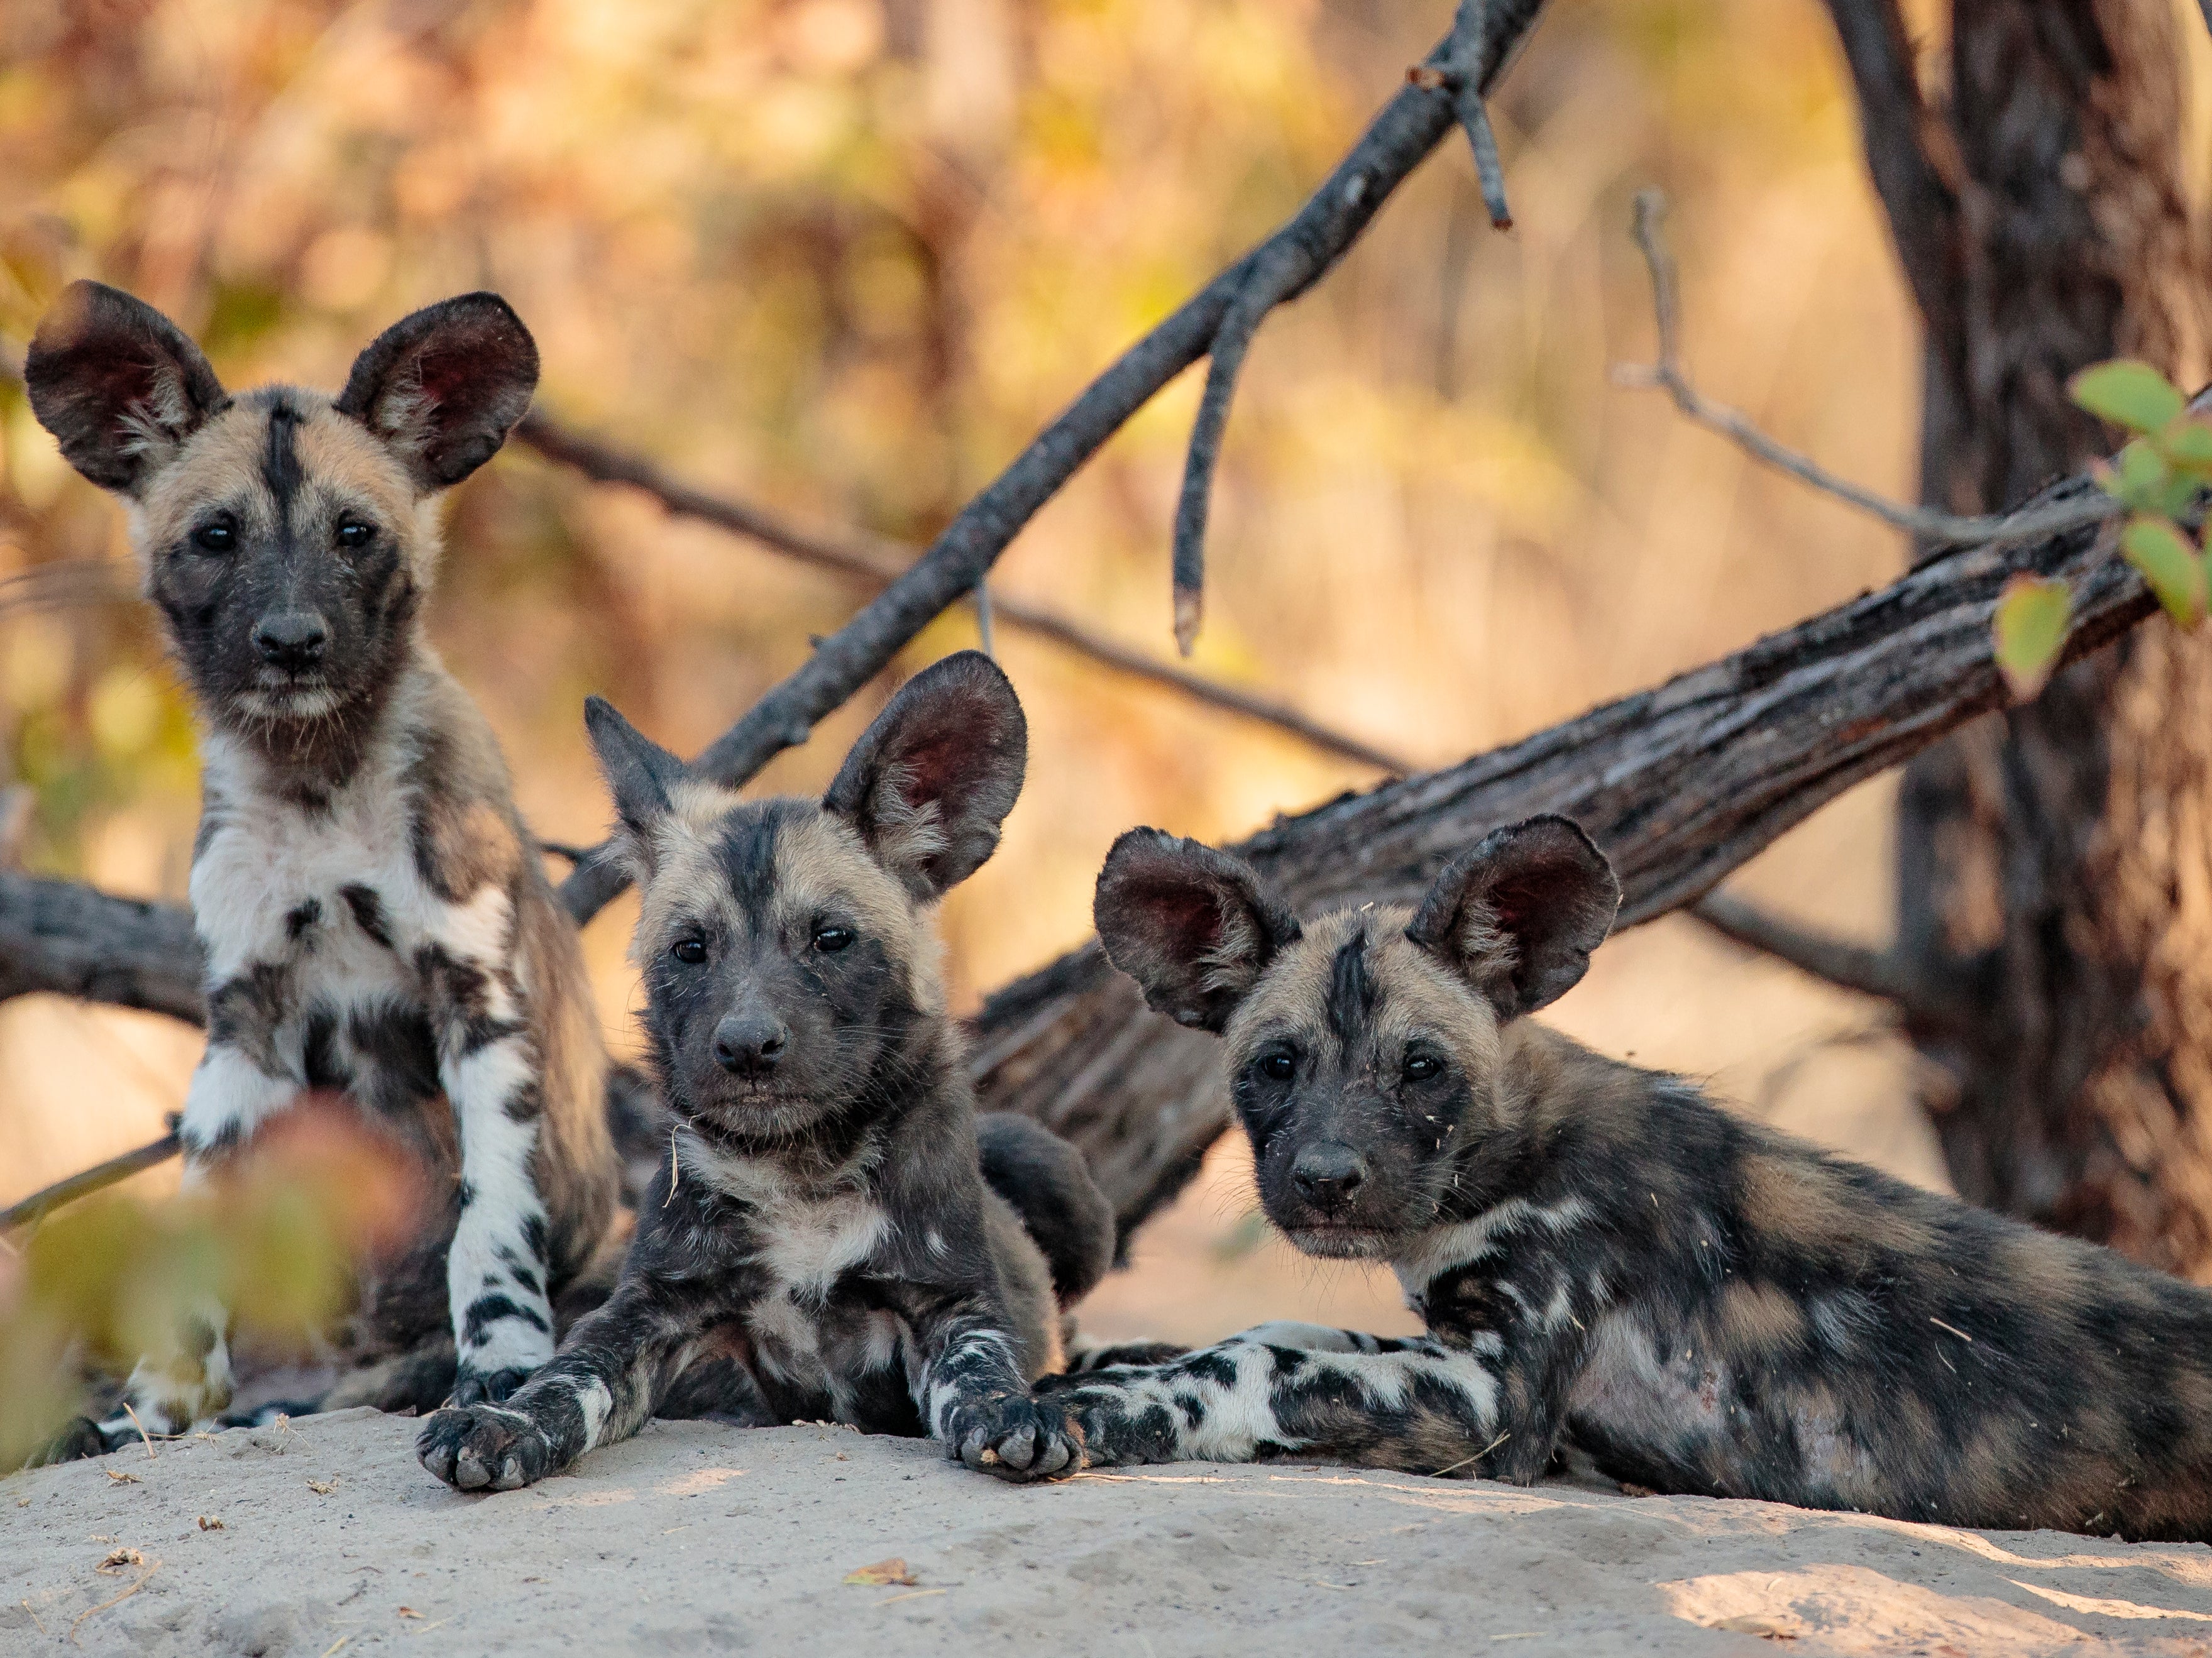 African wild dog pups. The species are now having their pups an average of 22 days later each year than they were 30 years ago